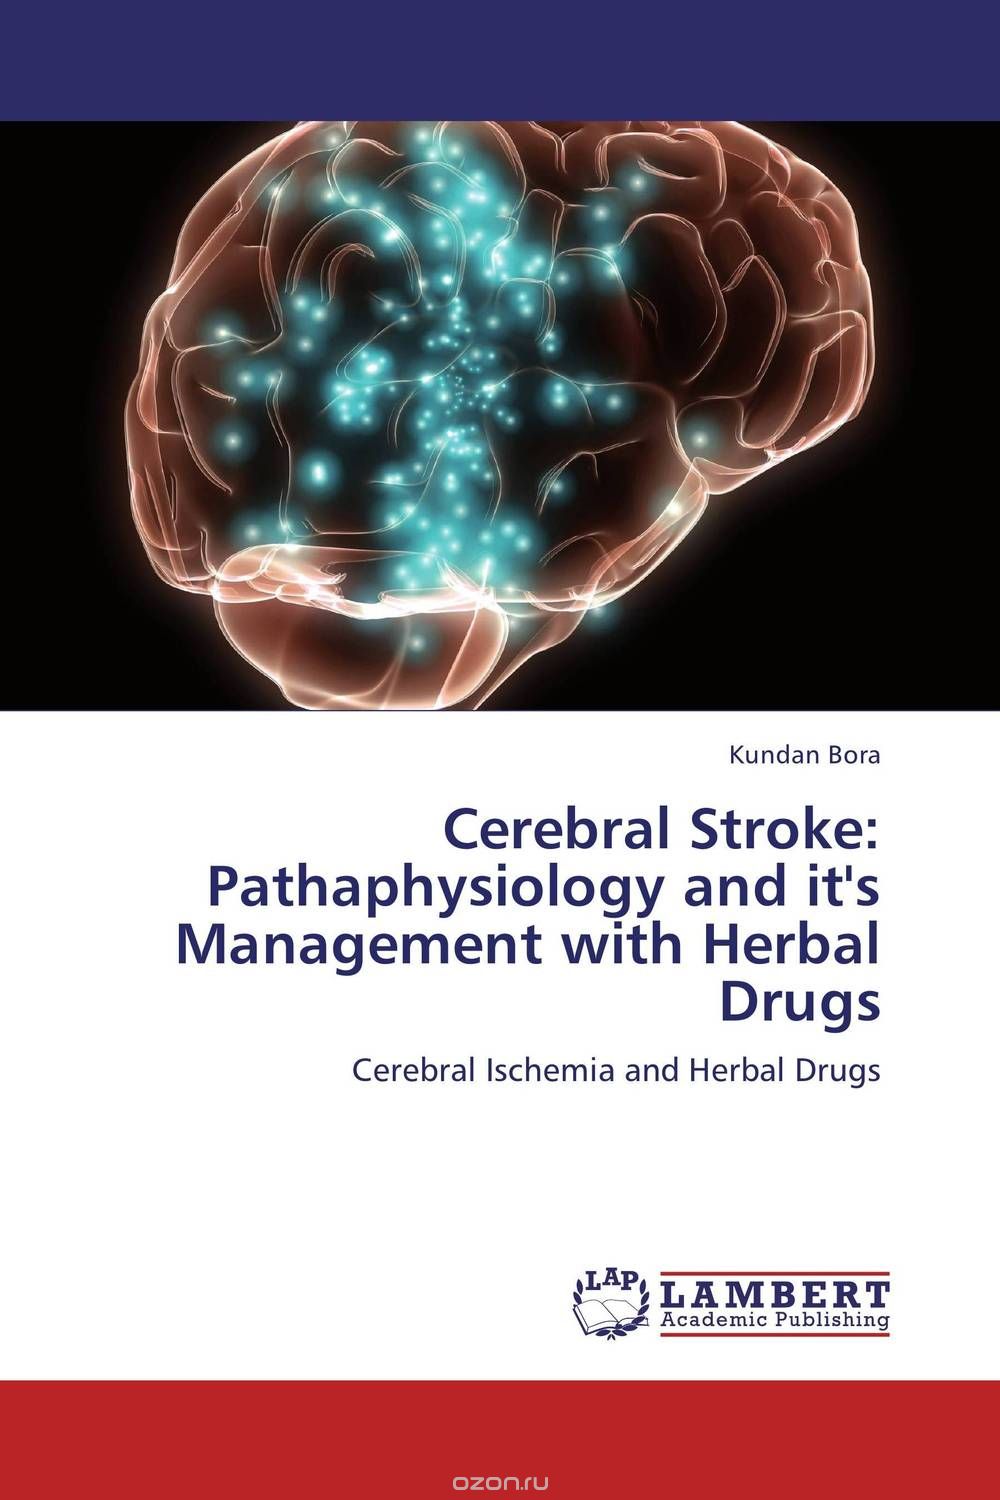 Скачать книгу "Cerebral Stroke: Pathaphysiology and it's Management with Herbal Drugs"